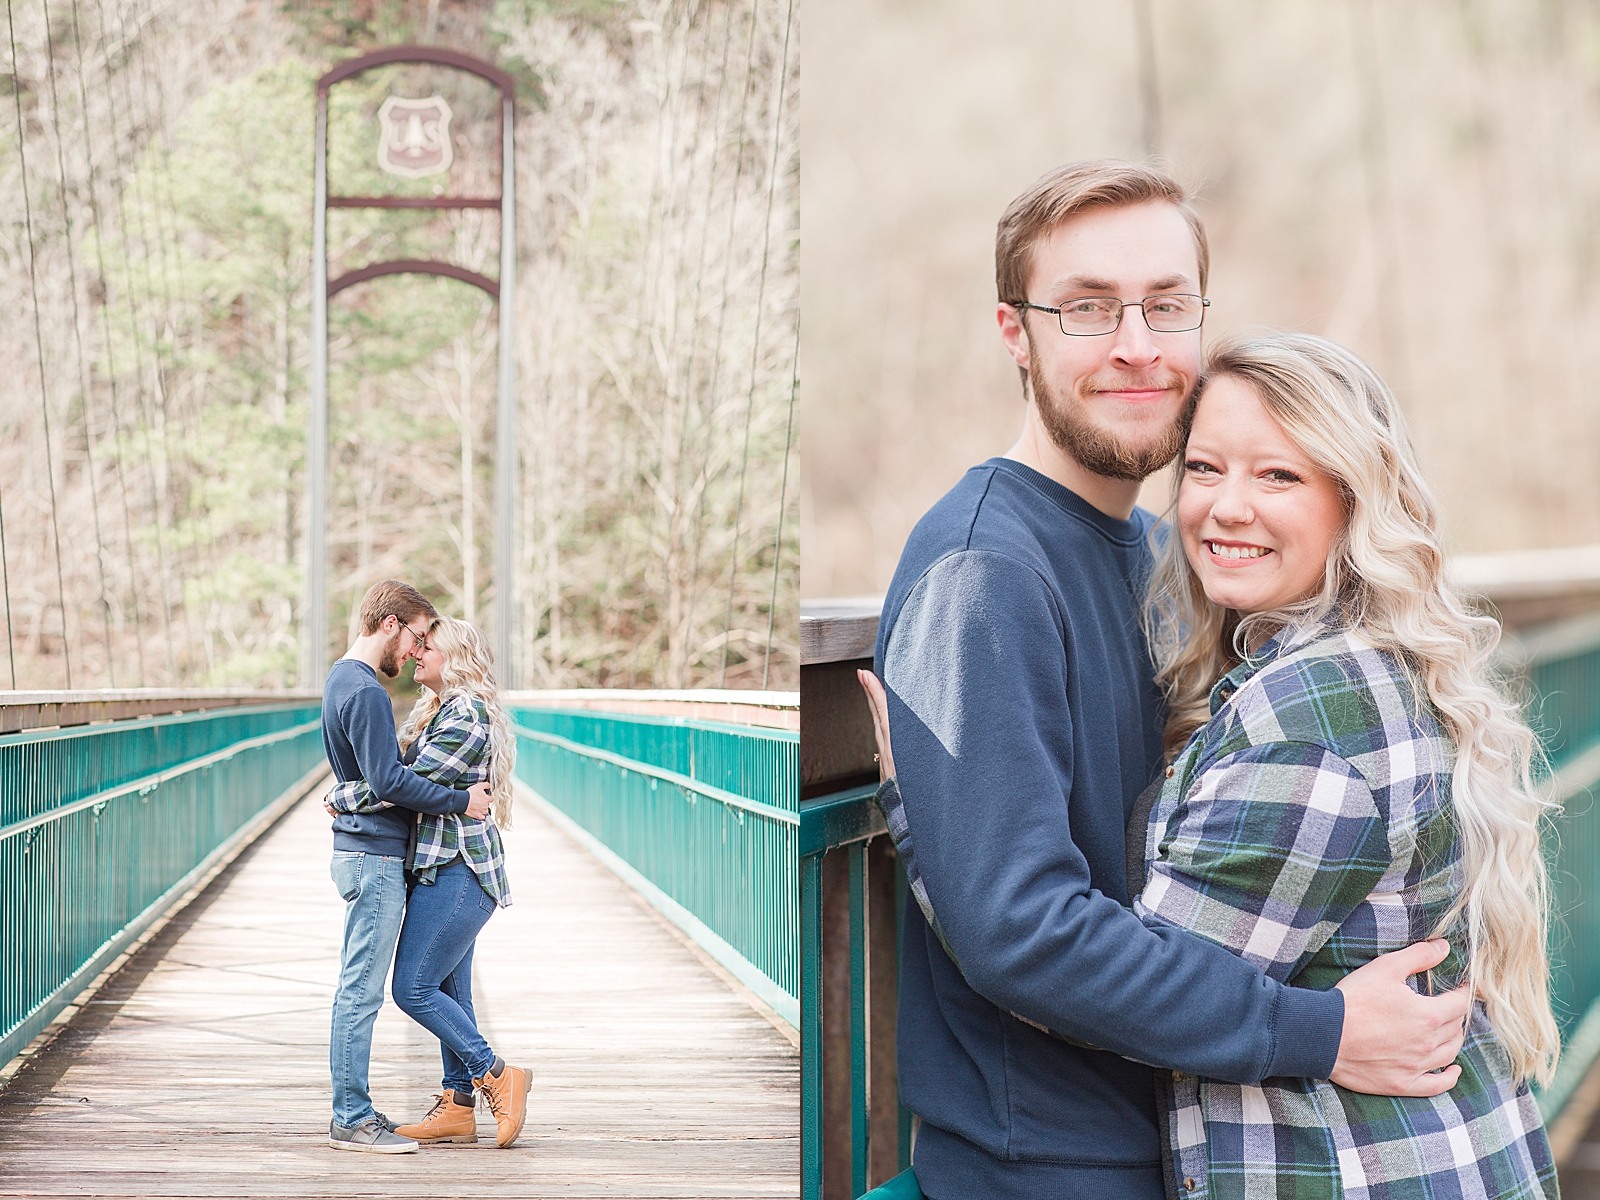 Ocoee River Engagement Session Cody and Haley nose to nose and smiling at camera on bridge Photos